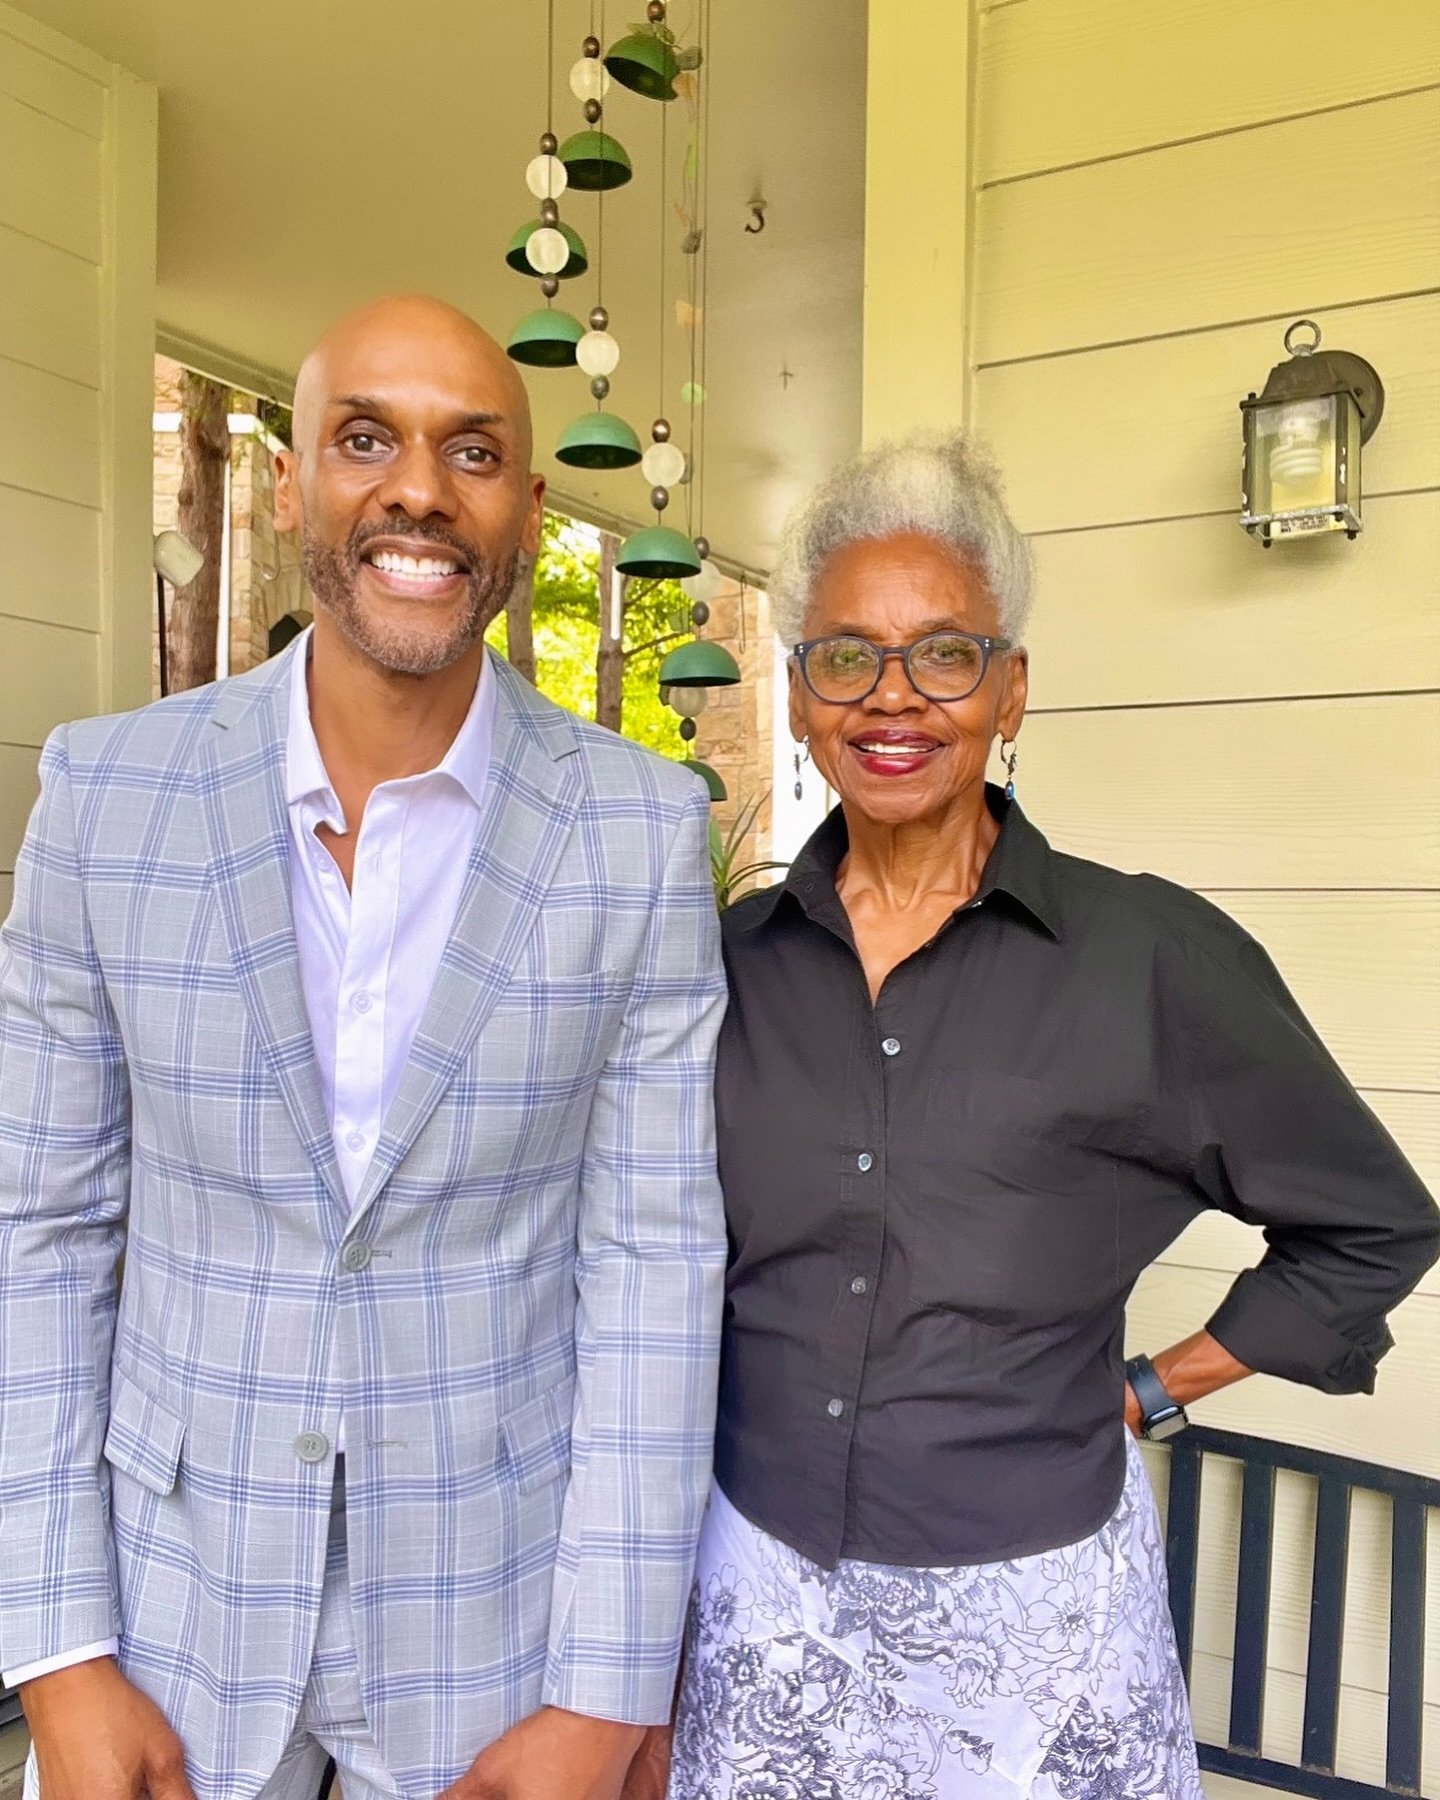 Blessed to be able to celebrate Mother&rsquo;s Day with my mom today in Texas. At 80 years old, she still runs marathons and loves to garden. We just left church, and now we&rsquo;re headed to the @kehindewiley exhibit at the Houston Museum of Fine A